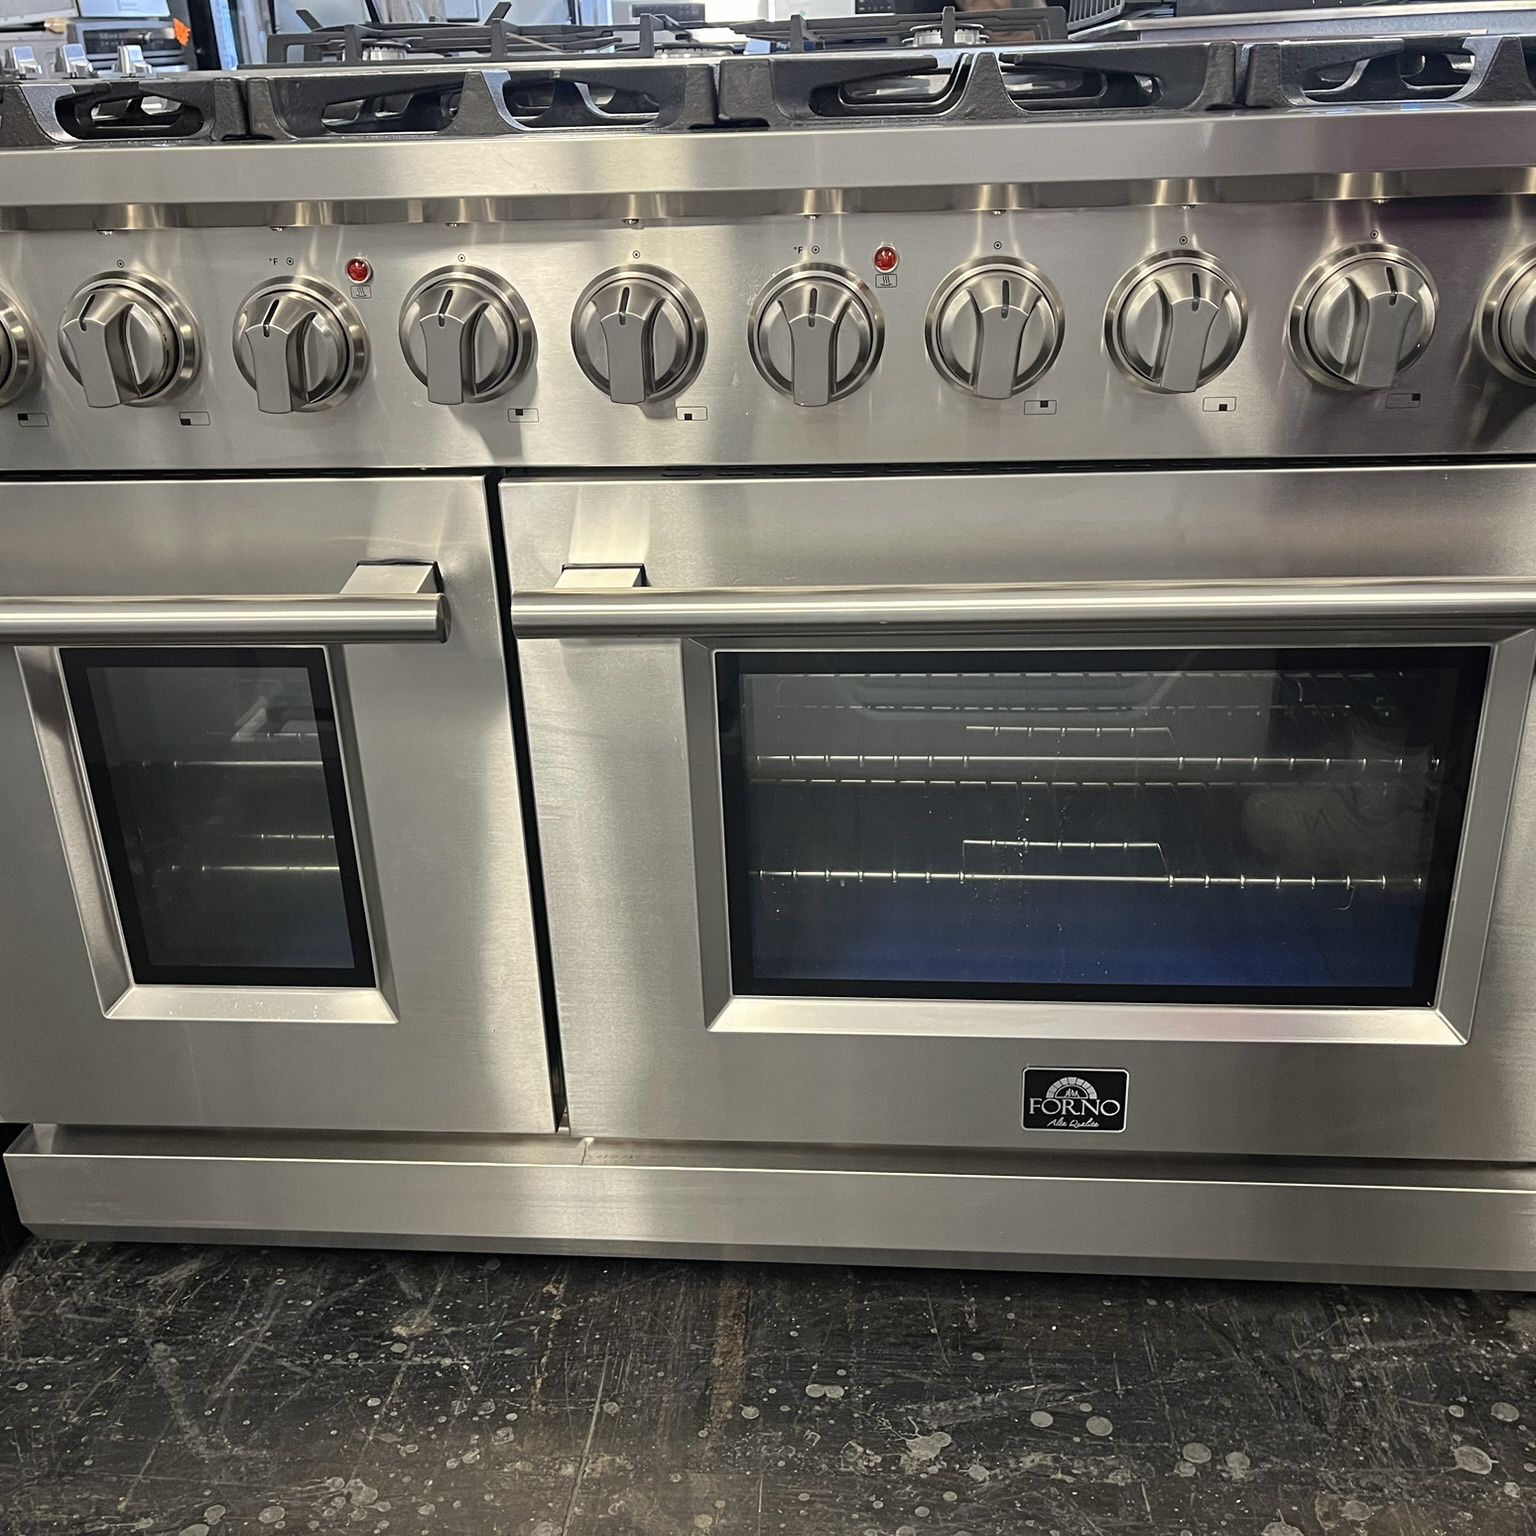 🚩🚩 FORNO 48” Built In Range Stainless Steel Stove 🚩🚩🚩